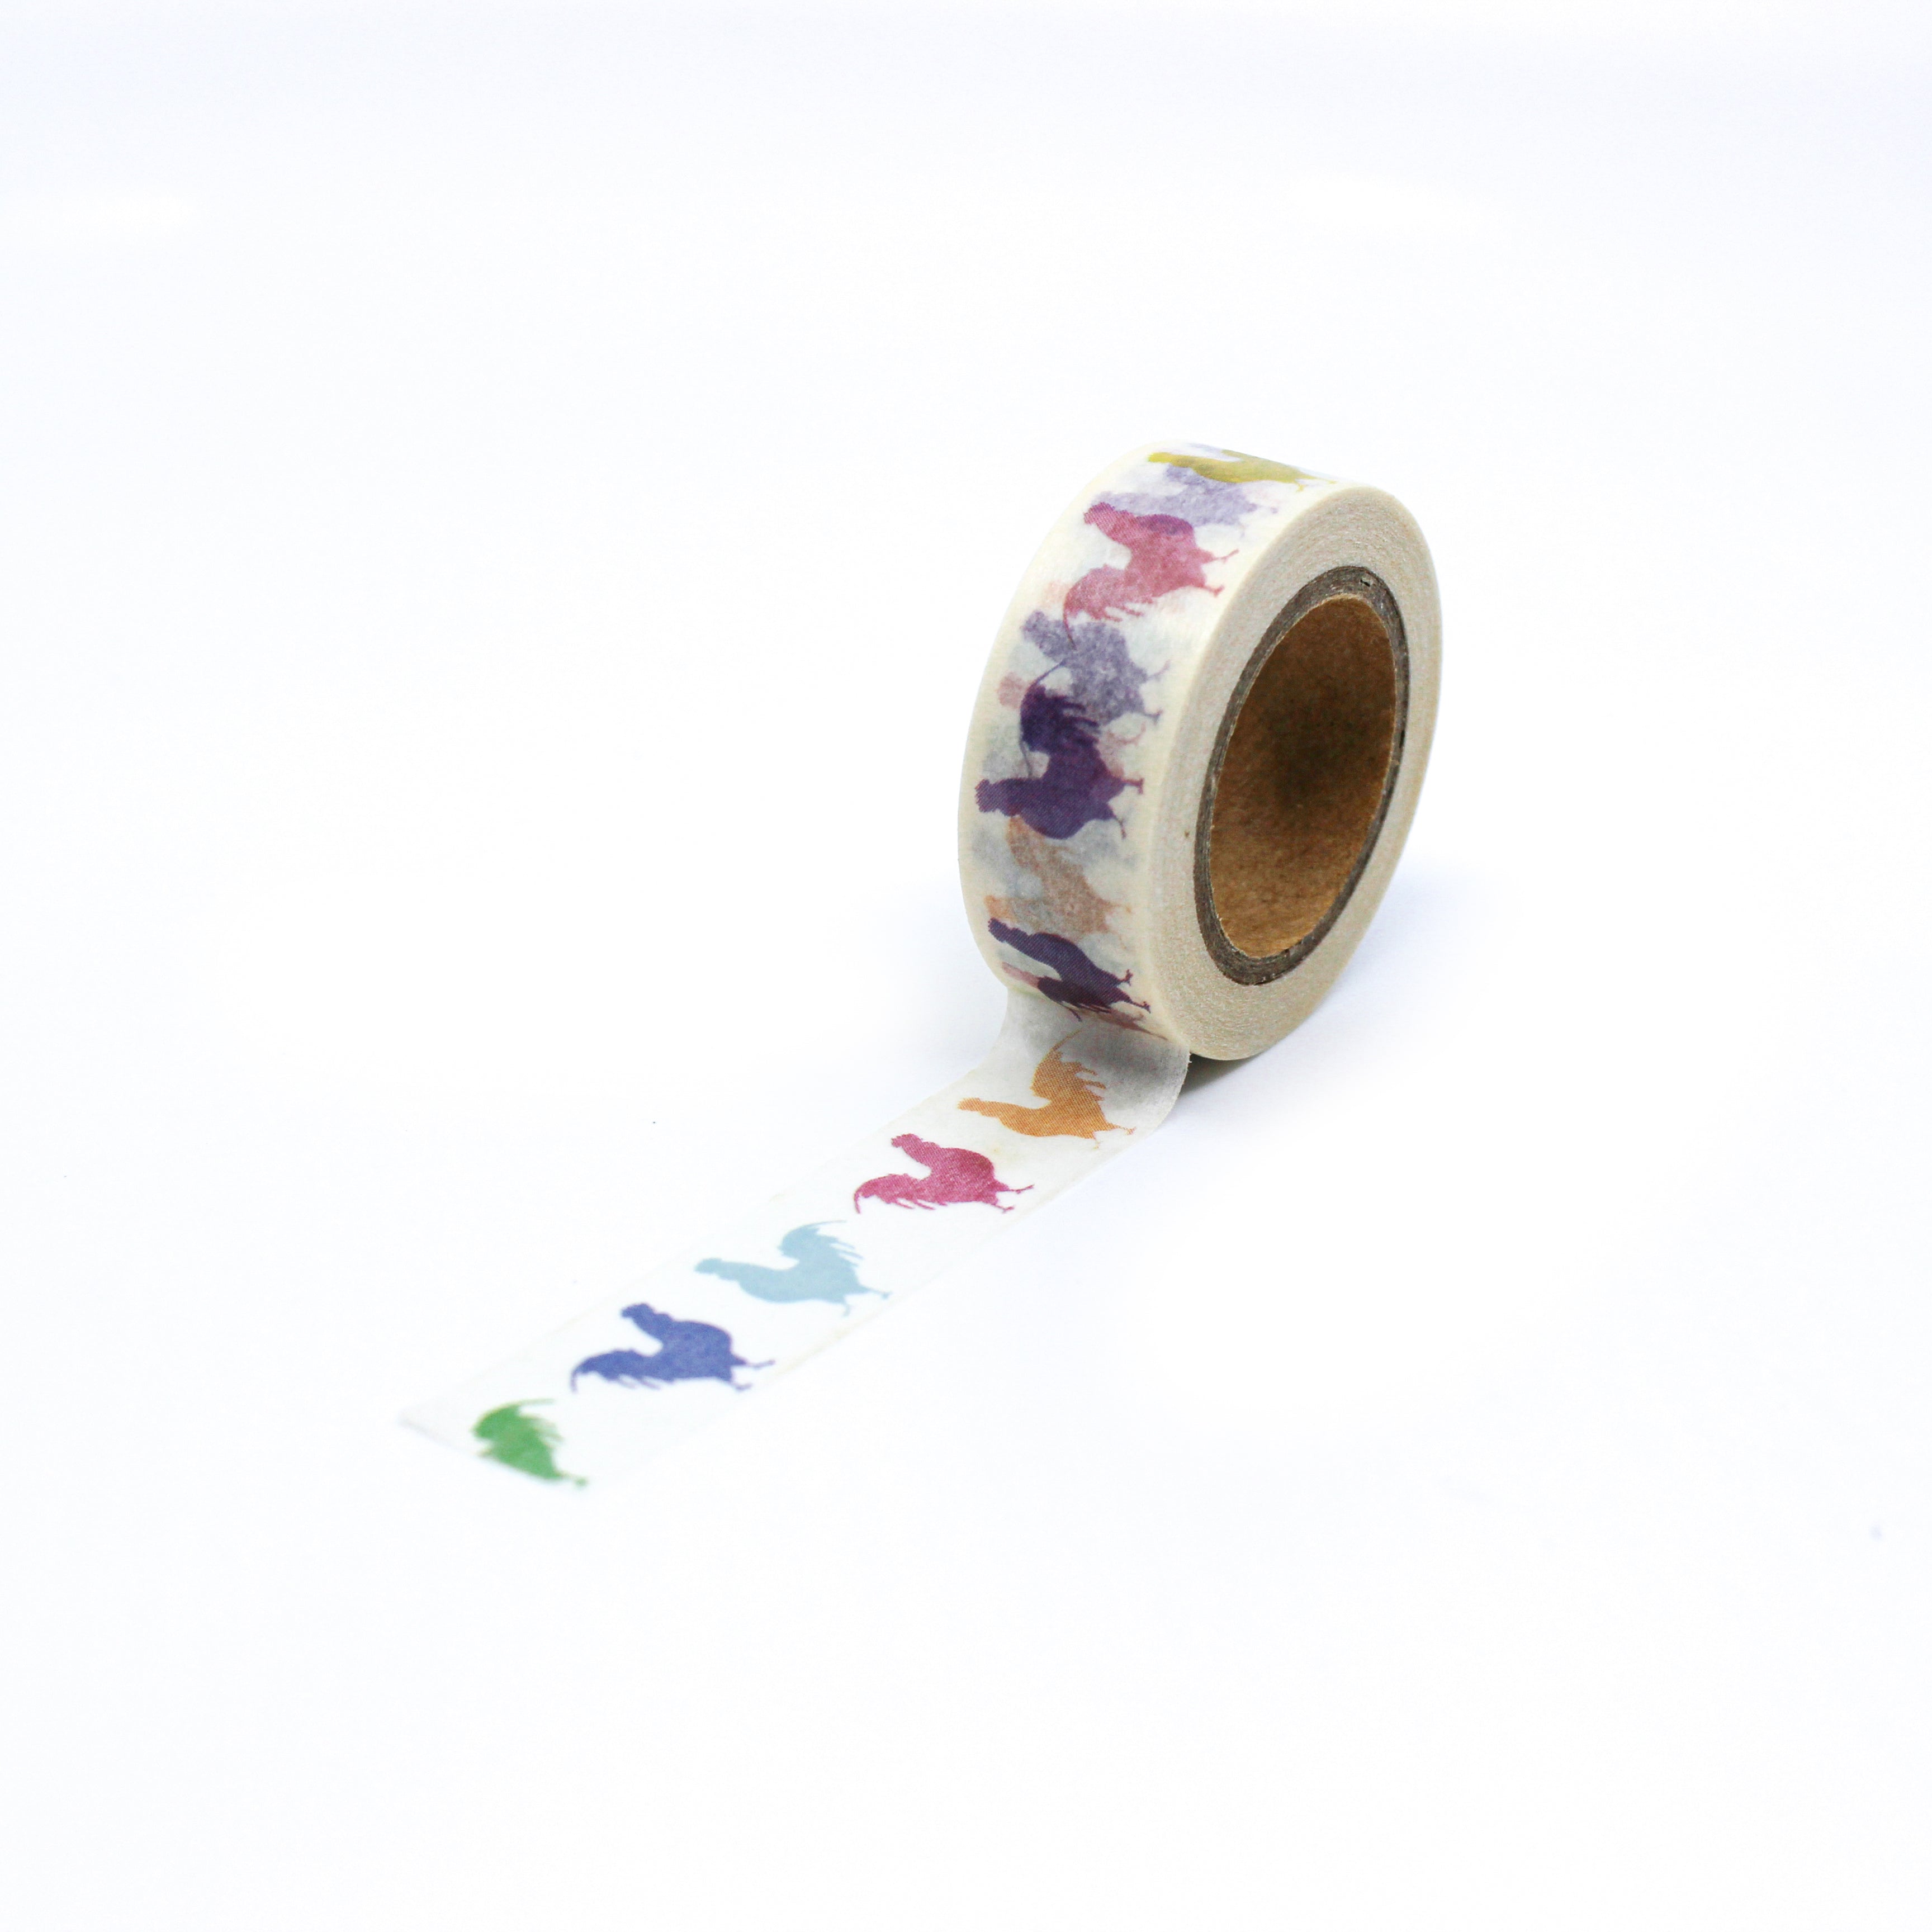 This is a full pattern repeat view of multi-color rooster washi tape from BBB Supplies Craft Shop